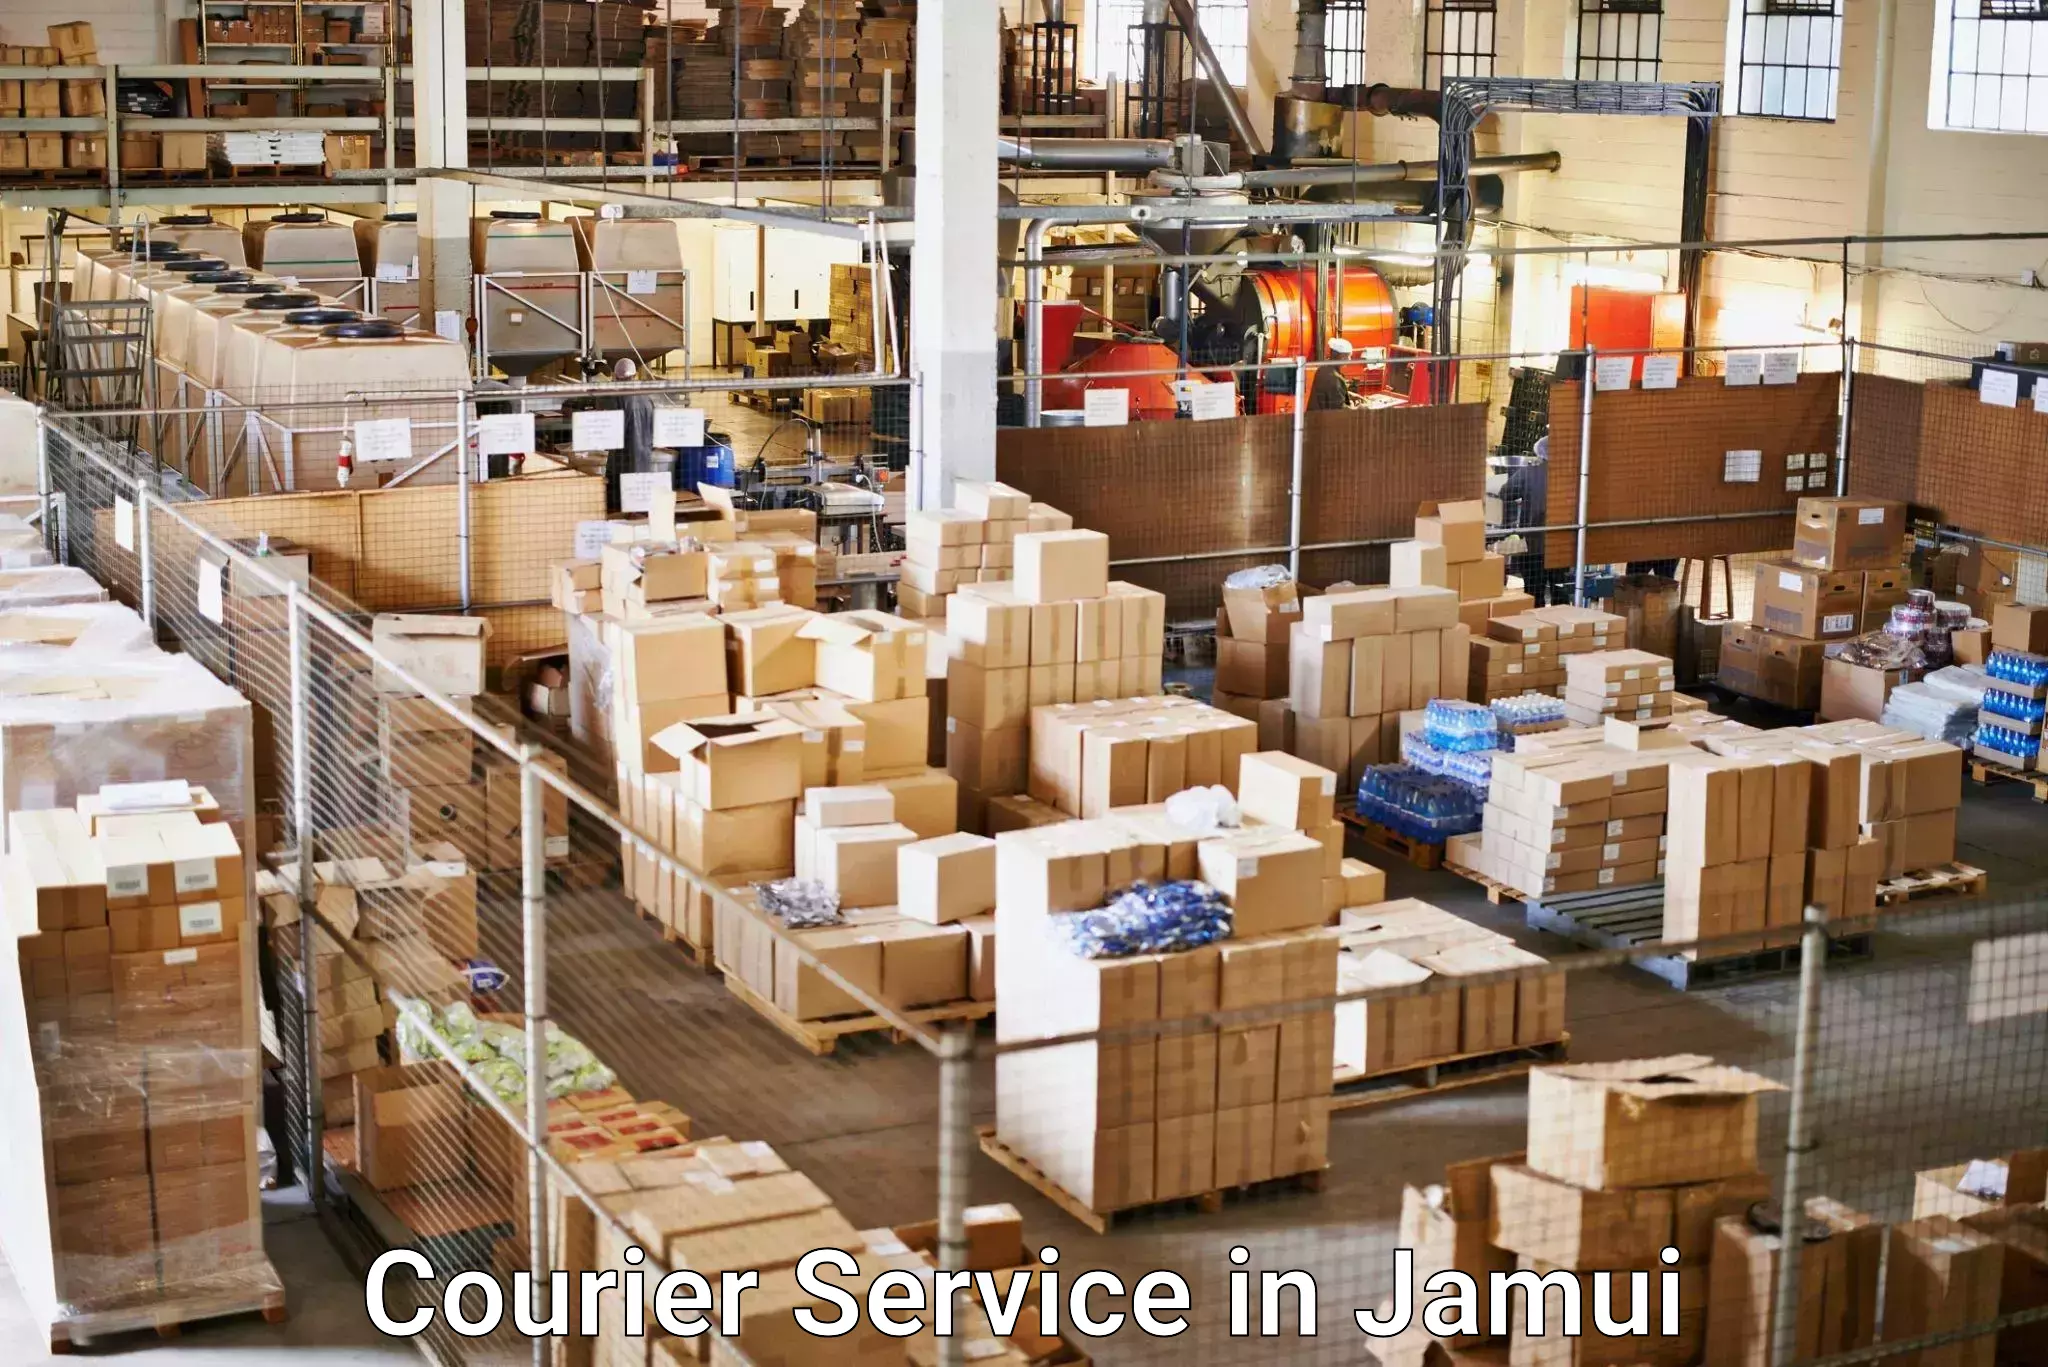 Fast delivery service in Jamui